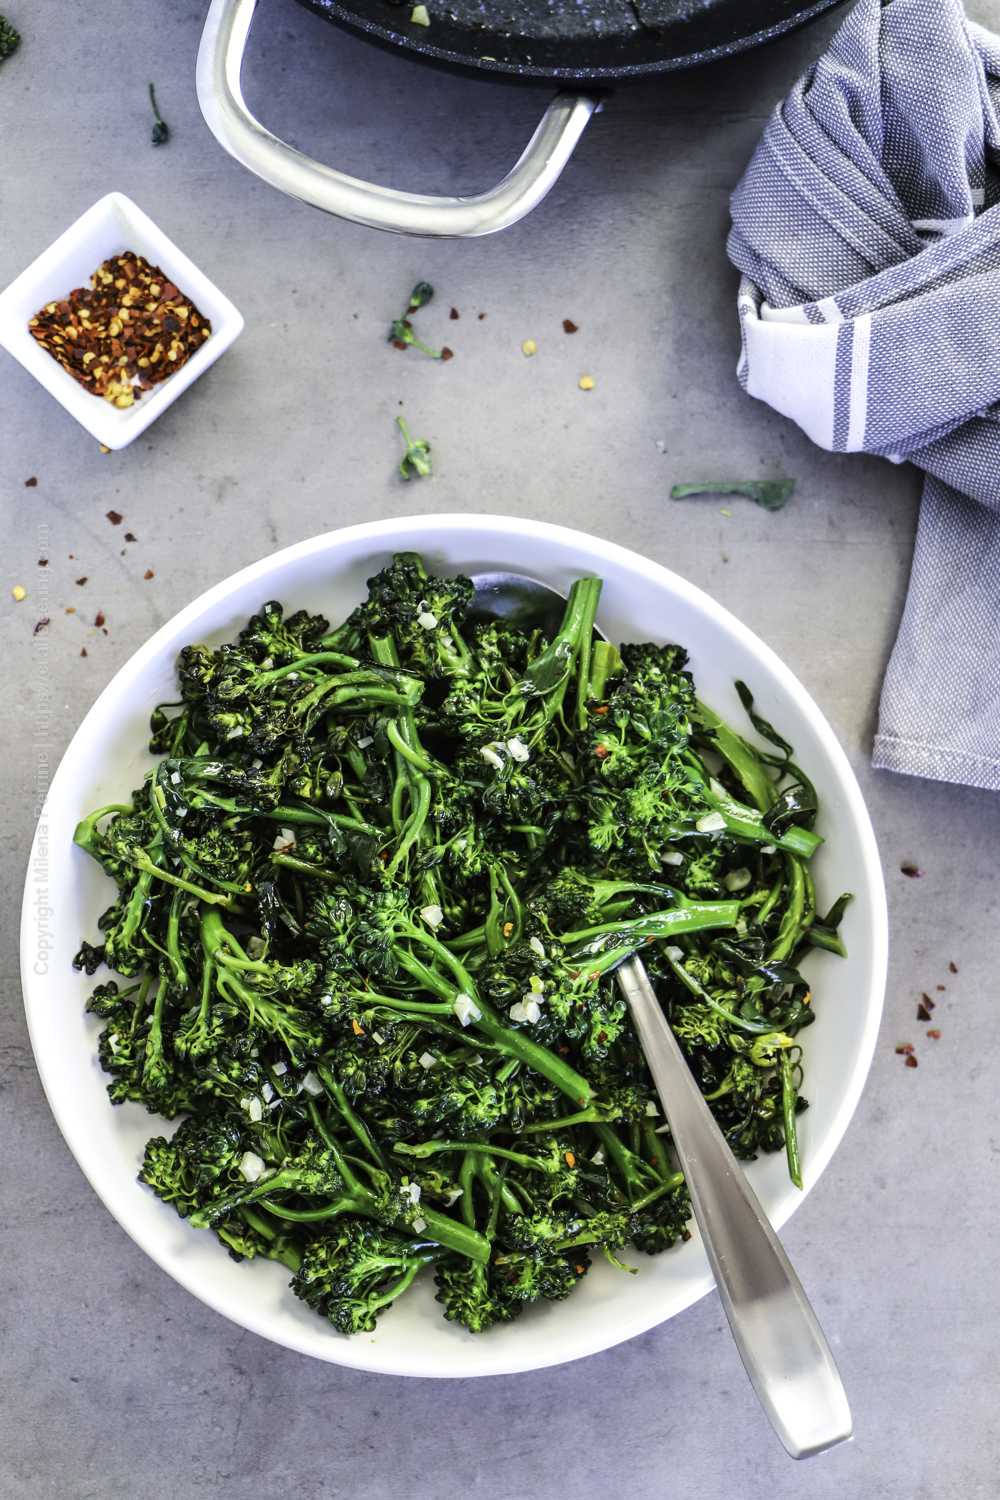 Steam fried broccolini with garlic and red pepper flakes. 